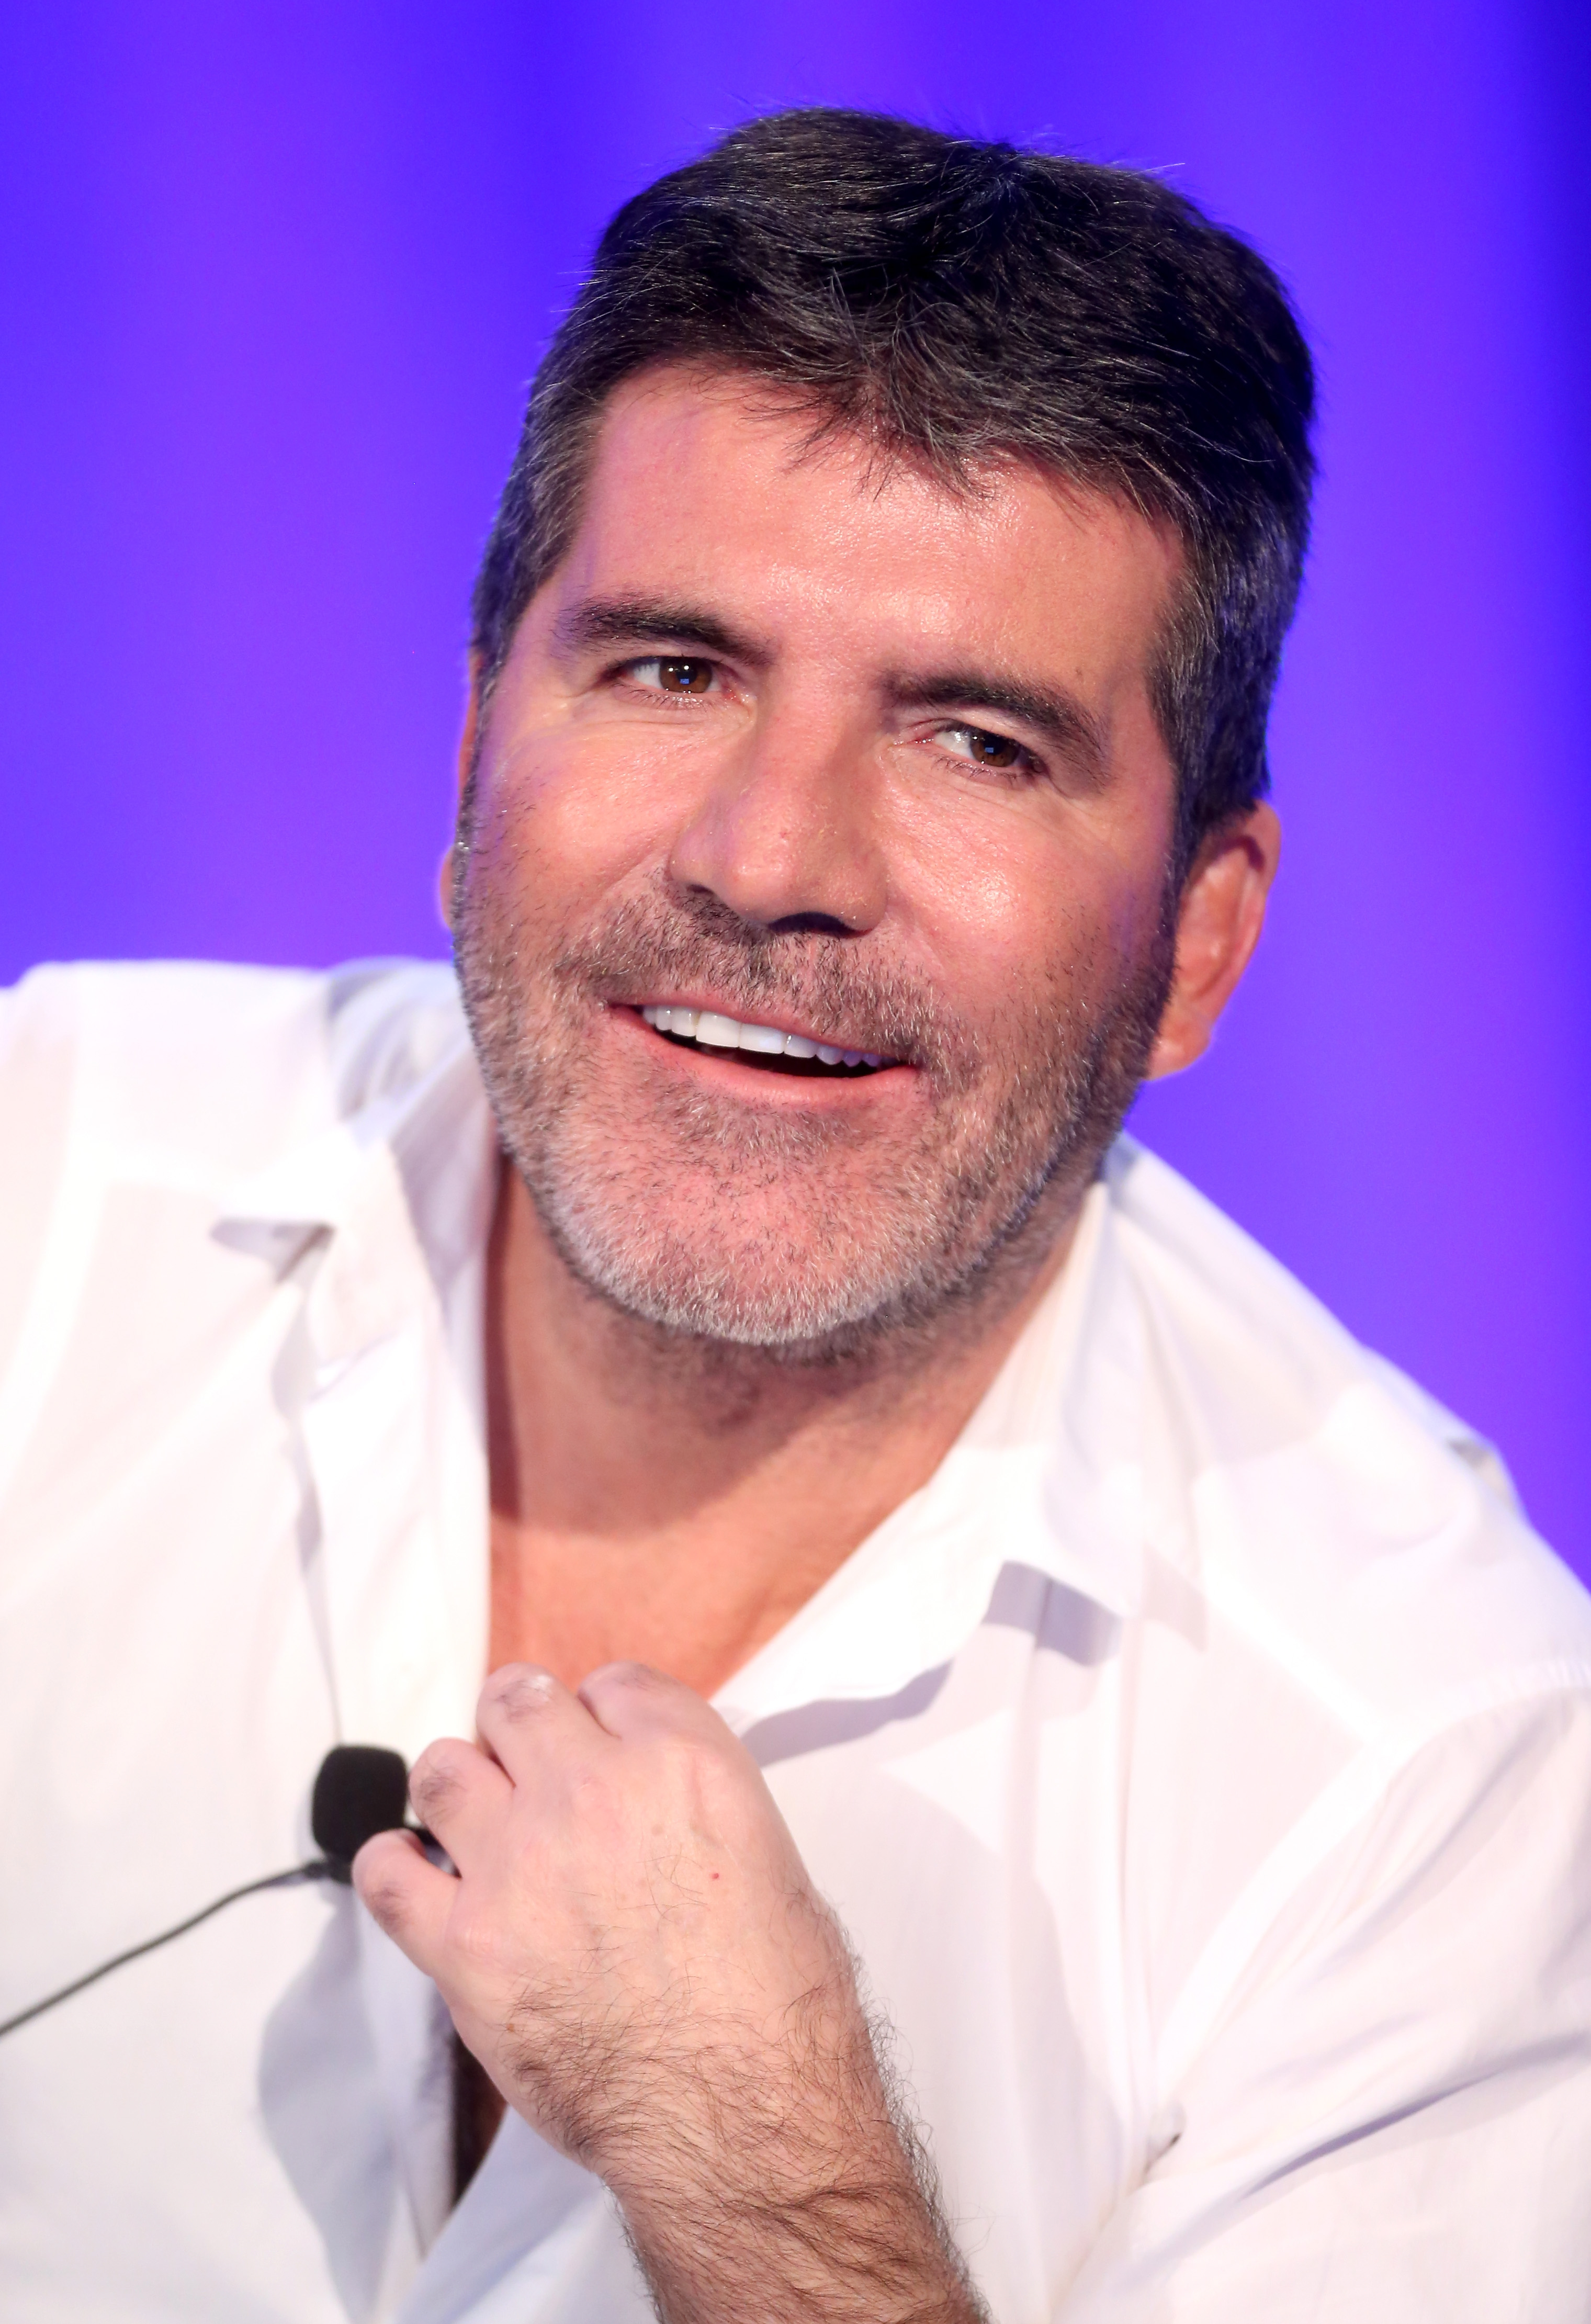 Simon Cowell at the 2016 NBC Universal Summer Press Day in California | Source: Getty Images